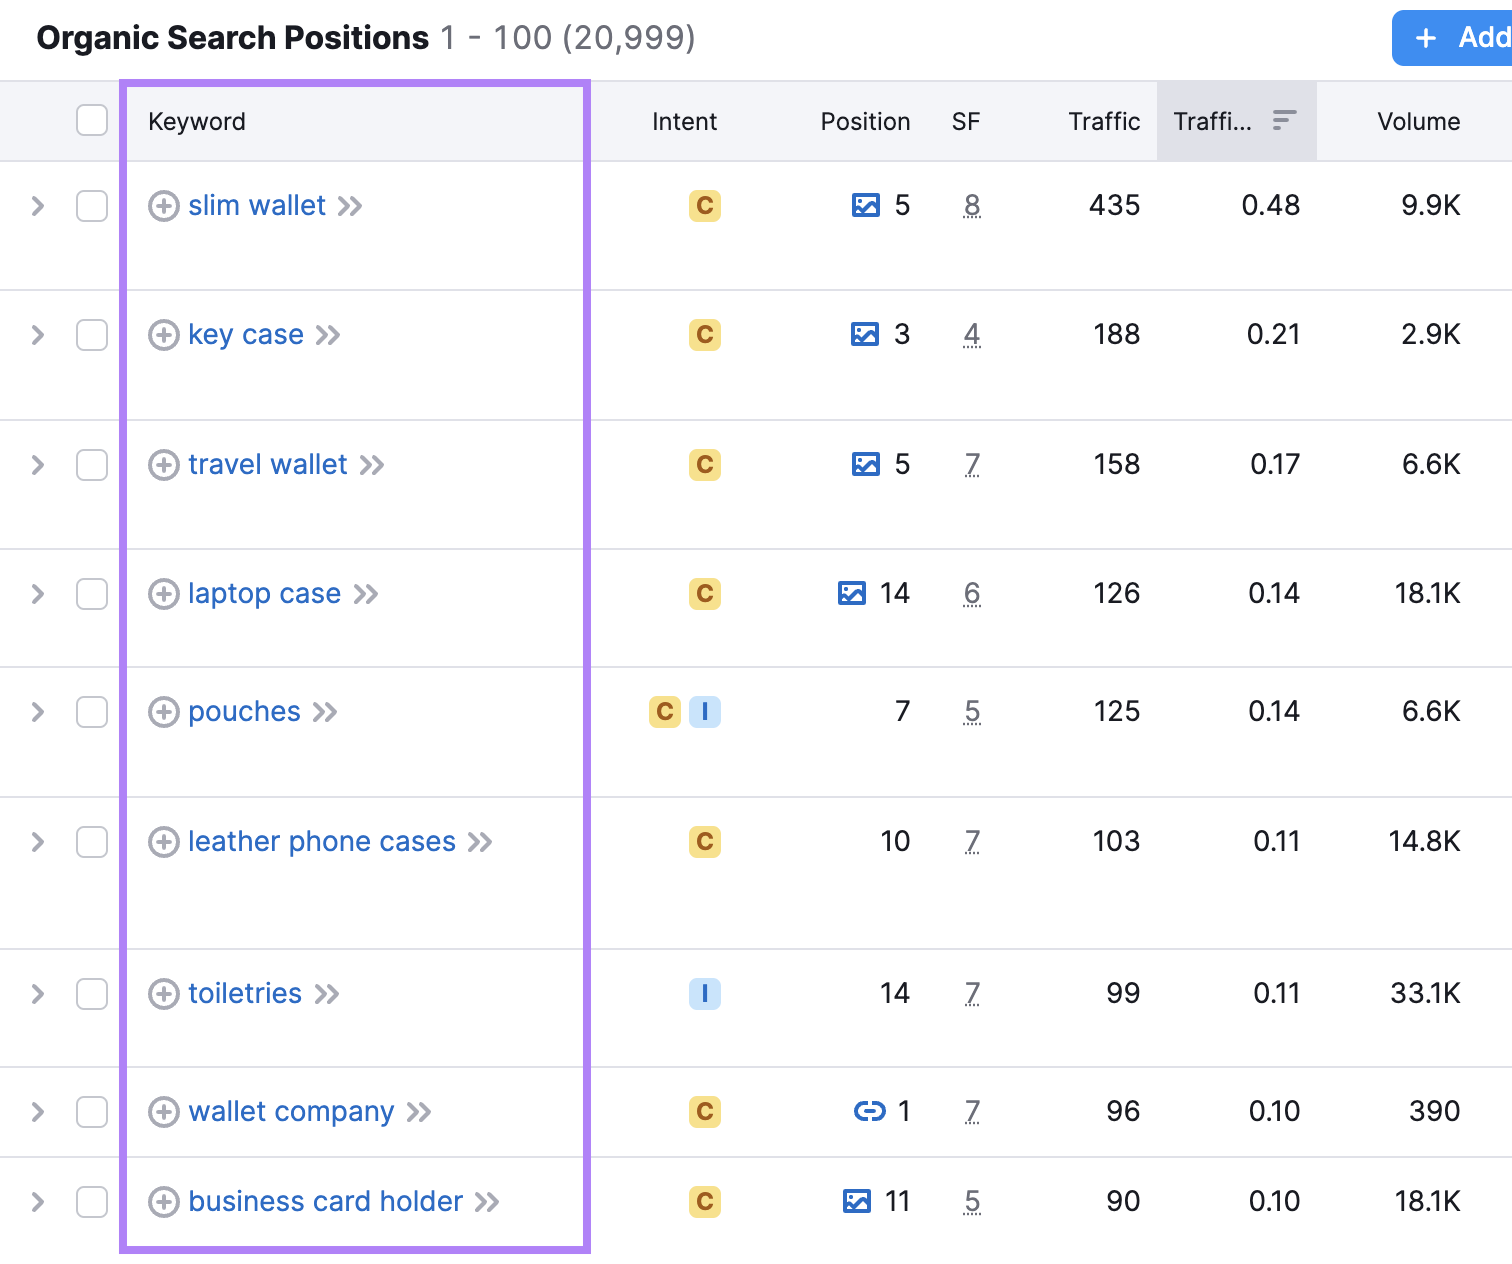 "Organic Search Positions" report now shows all the keywords the competitor is targeting without branded keywords